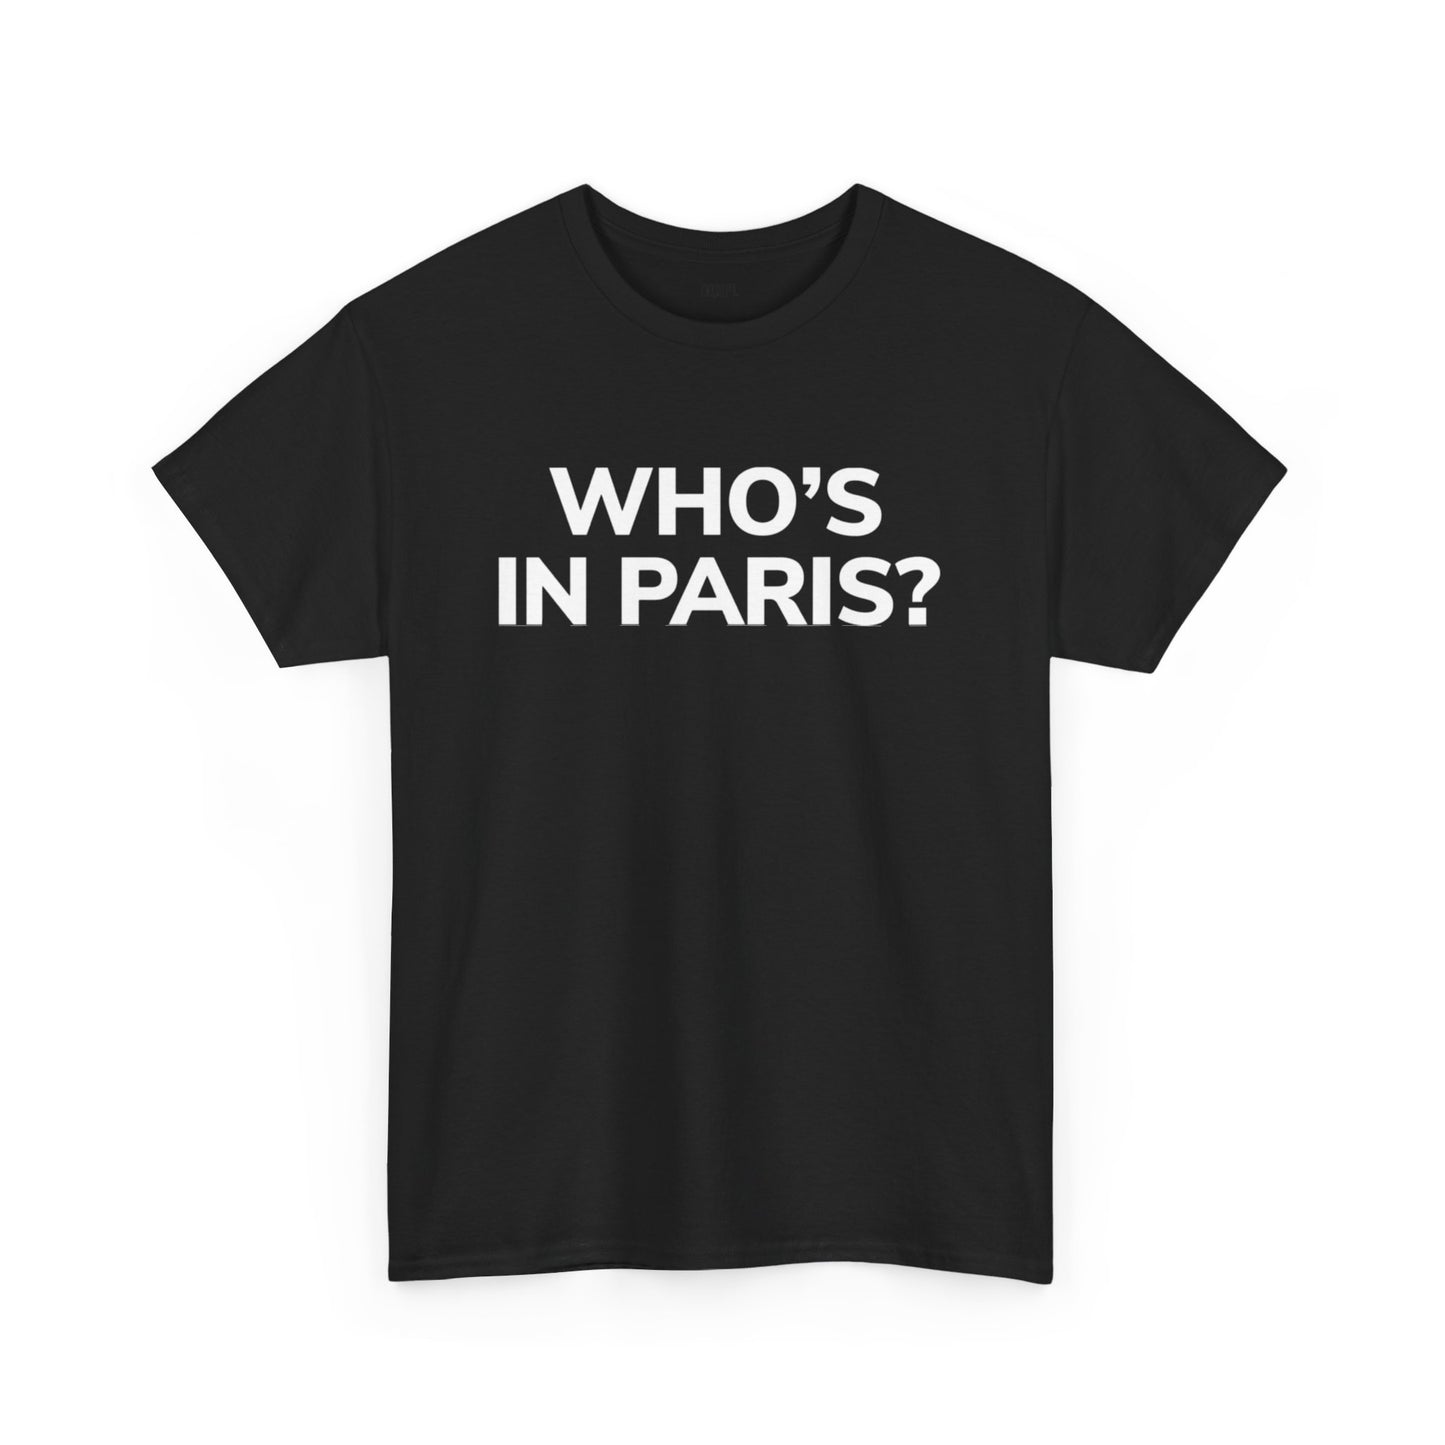 WHO'S IN PARIS? (T - SHIRT)